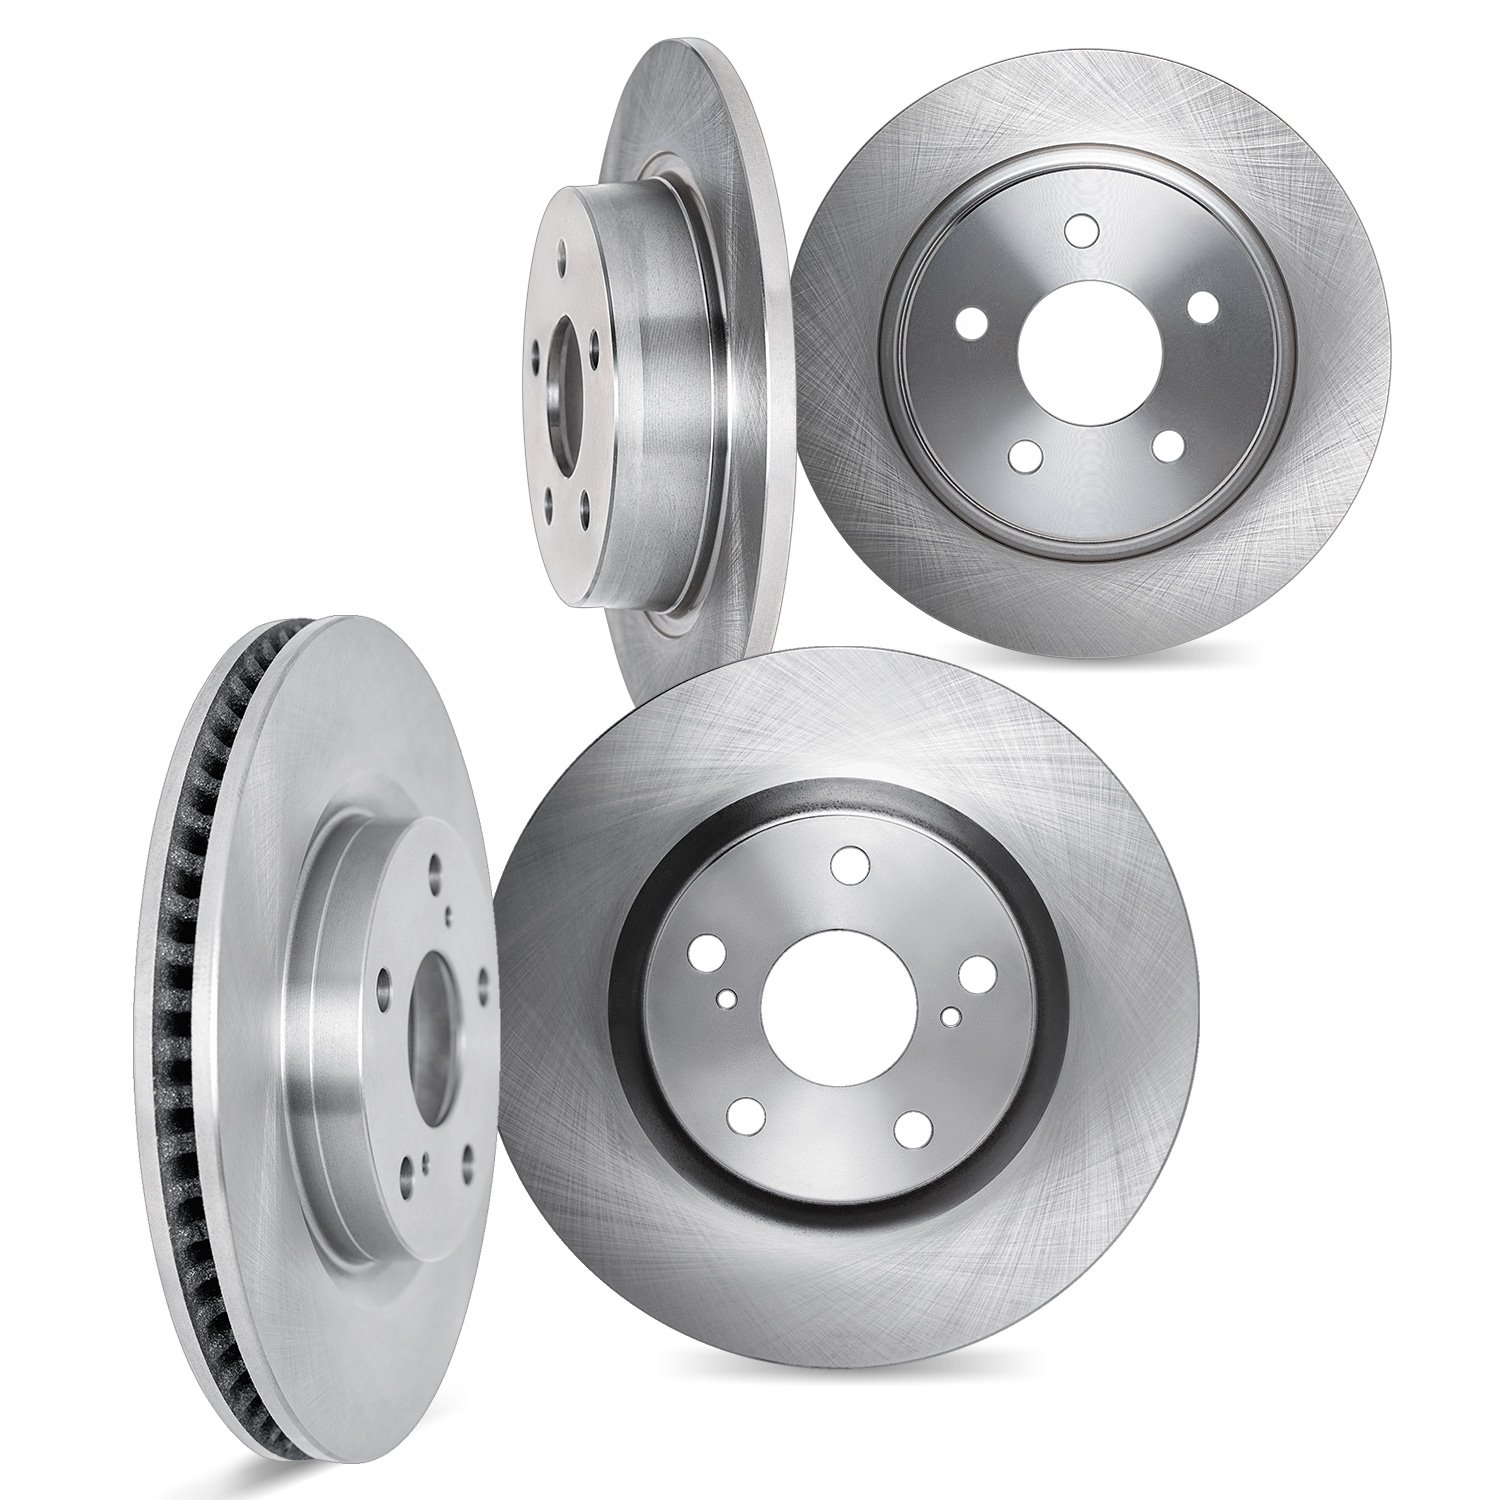 6004-42044 Brake Rotors, Fits Select Mopar, Position: Front and Rear